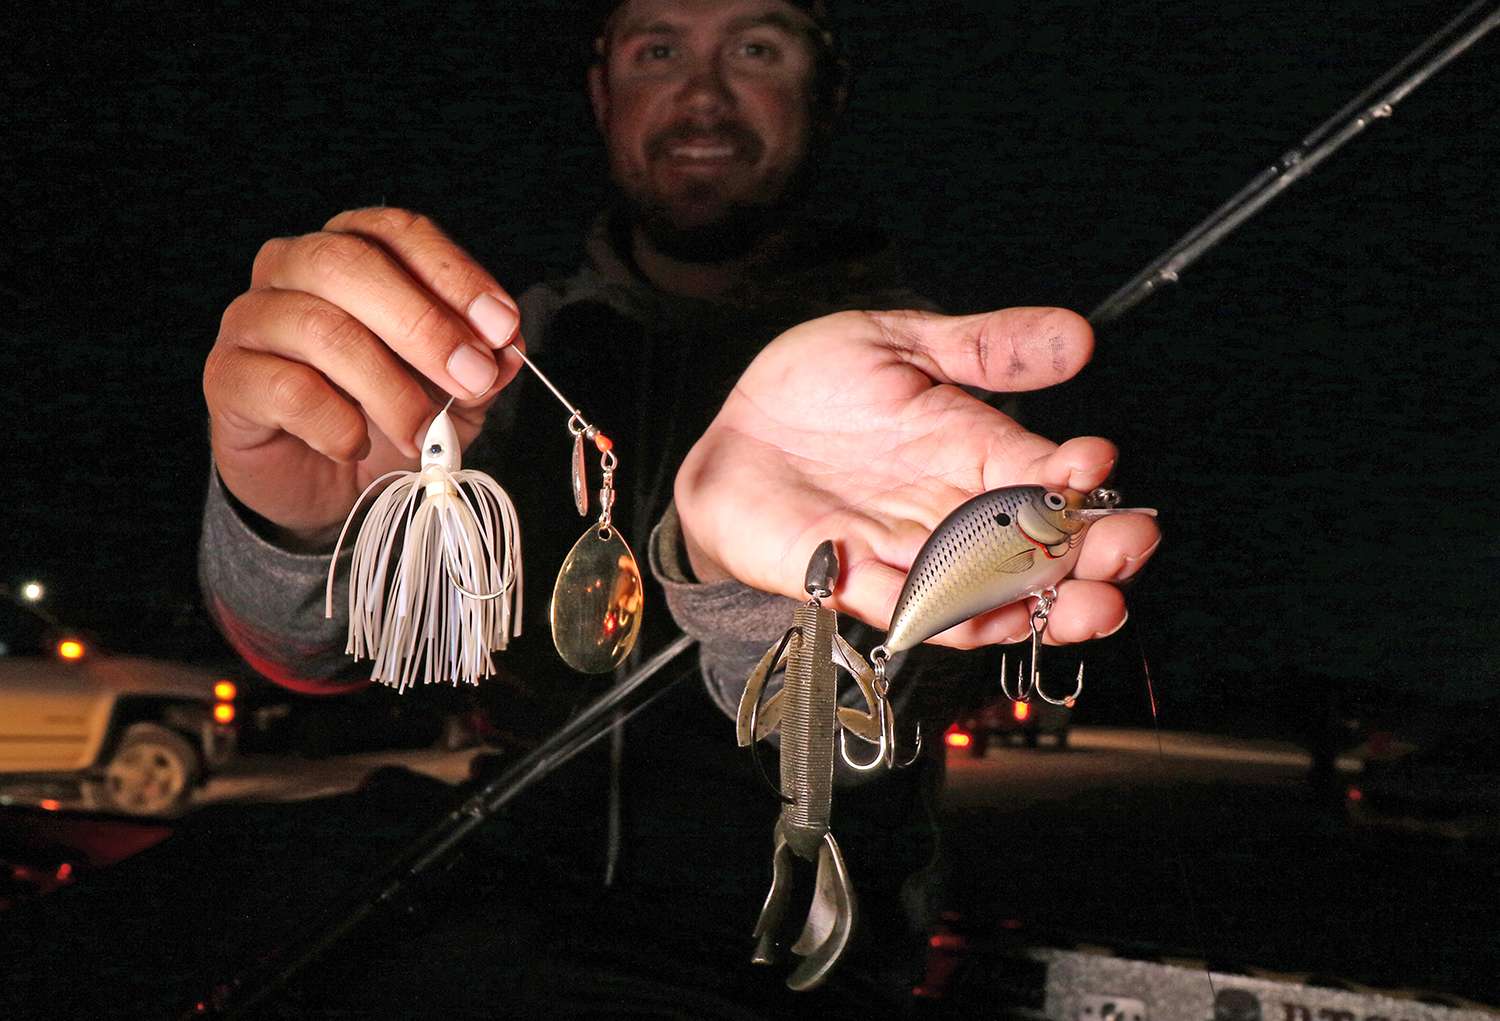 To finish seventh Drew Benton targeted prespawn bass and then switched to a flipping technique for bedding fish. For that tactic he chose a Doomsday Mauler 4.2, rigged to 5/0 Owner EWG Hook and 1/2-ounce Elite Tungsten Worm Weight. For migrating bass he chose a Bagley Sunny B Crankbait. Alternatively, he used a 1/2-ounce Nichols Lures Pulsator Spinnerbait with double Colorado blades. 